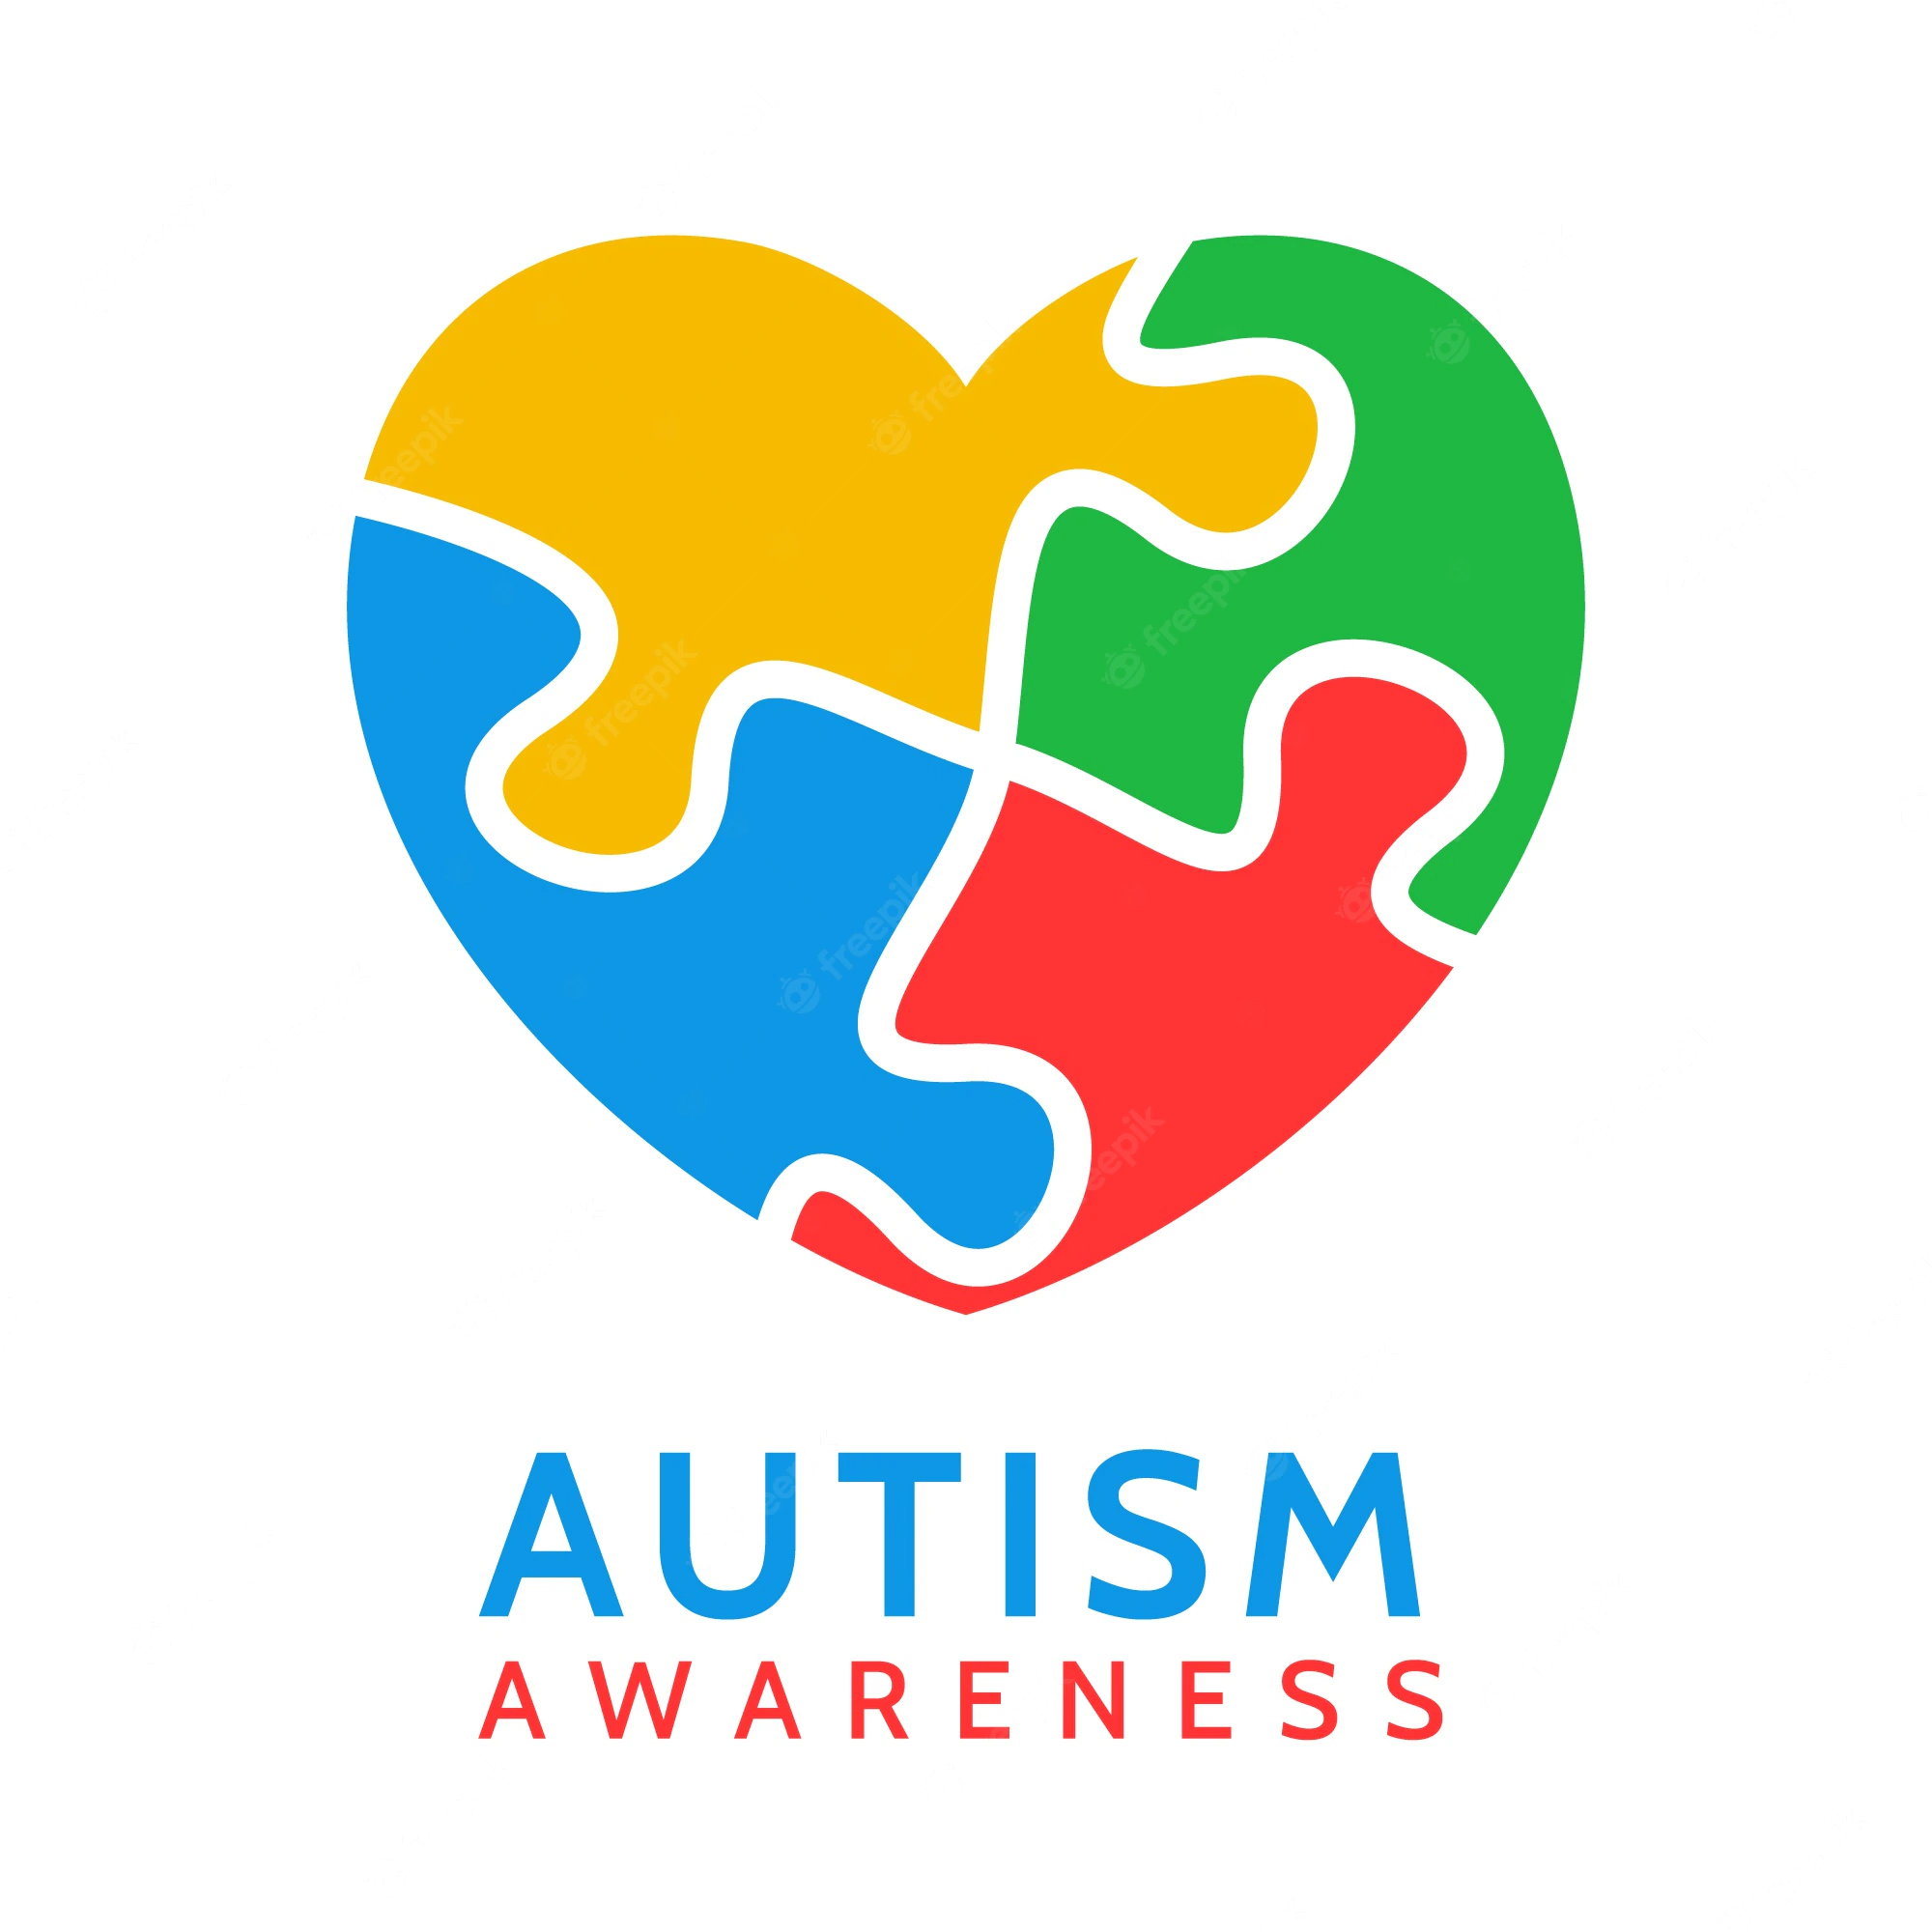 Featured image for “How Security Window Film Can Support People with Autism”